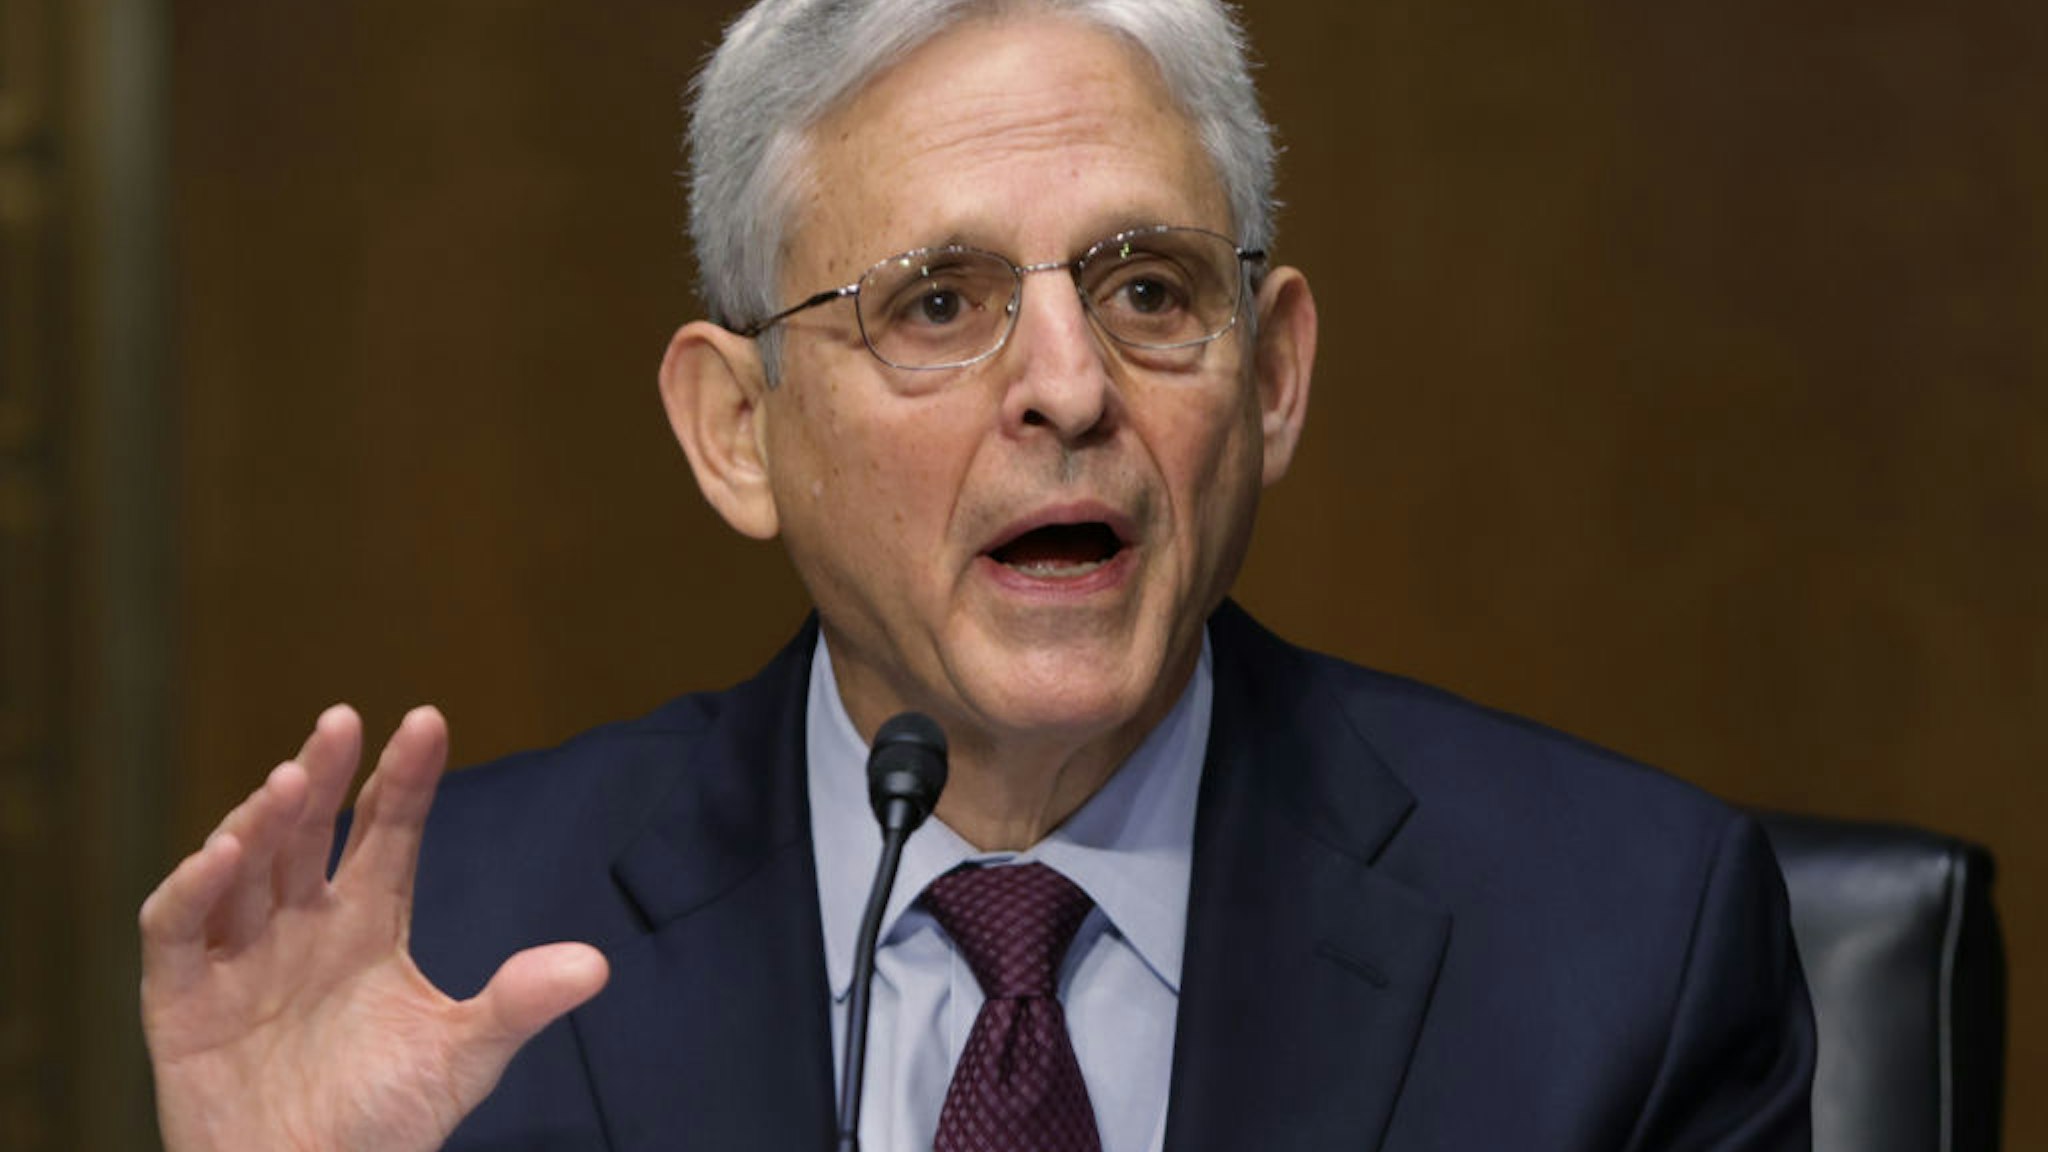 WASHINGTON, DC - OCTOBER 27: U.S. Attorney General Merrick Garland testifies at a Senate Judiciary Committee hearing about oversight of the Department of Justice on October 27, 2021 in Washington, DC. Attorney General Garland faced questions about various investigations and DOJ policies. (Photo by Tasos Katopodis-Pool/Getty Images)